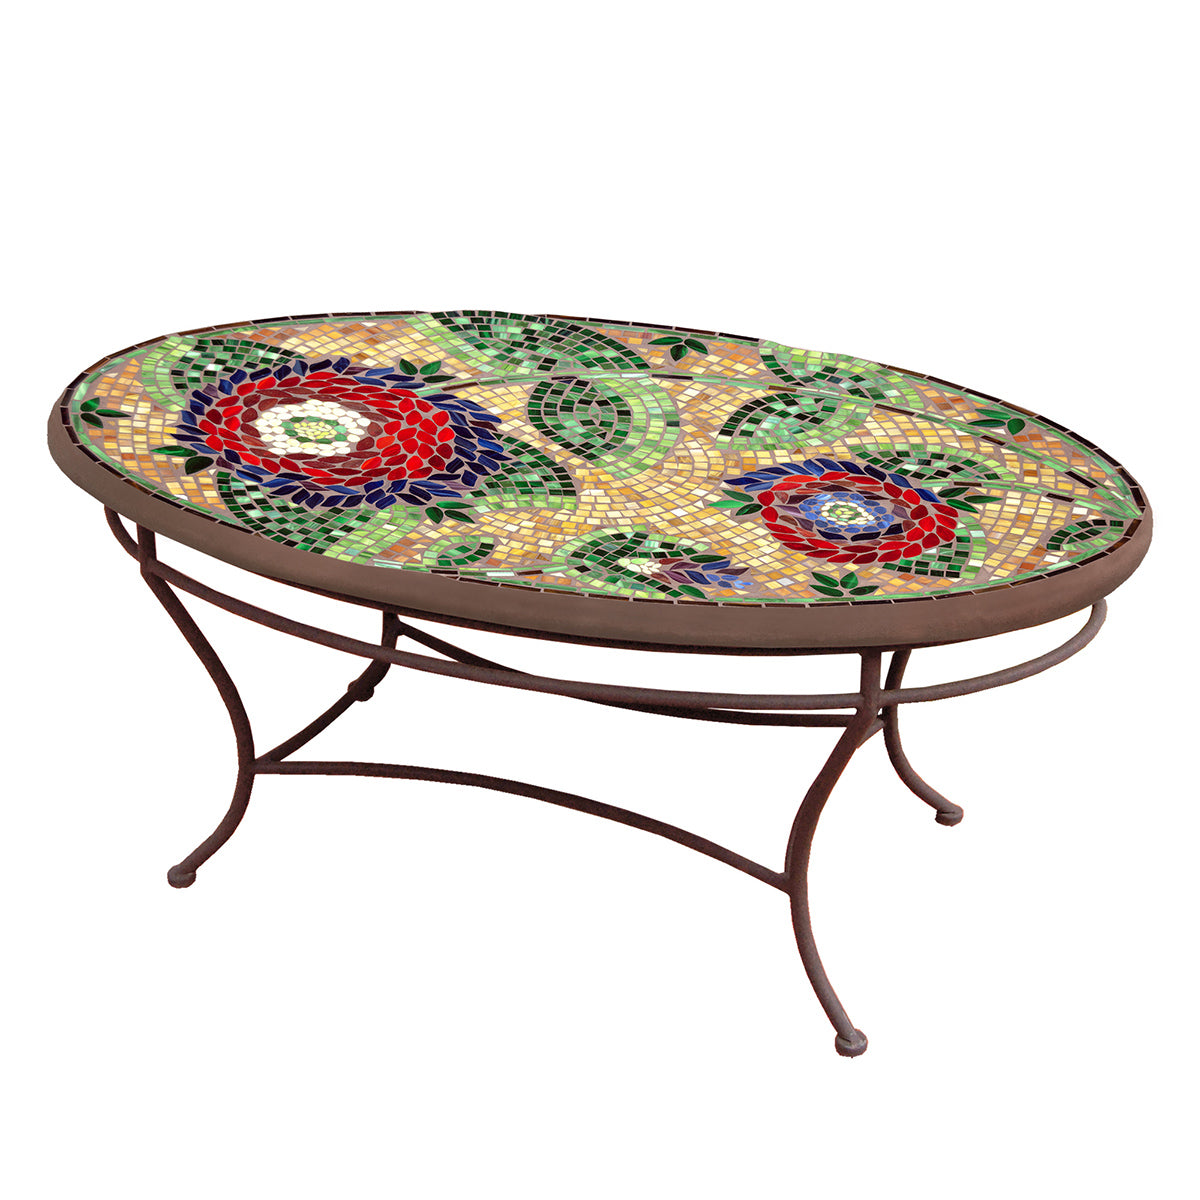 Dahlia Mosaic Coffee Table - Oval-Iron Accents